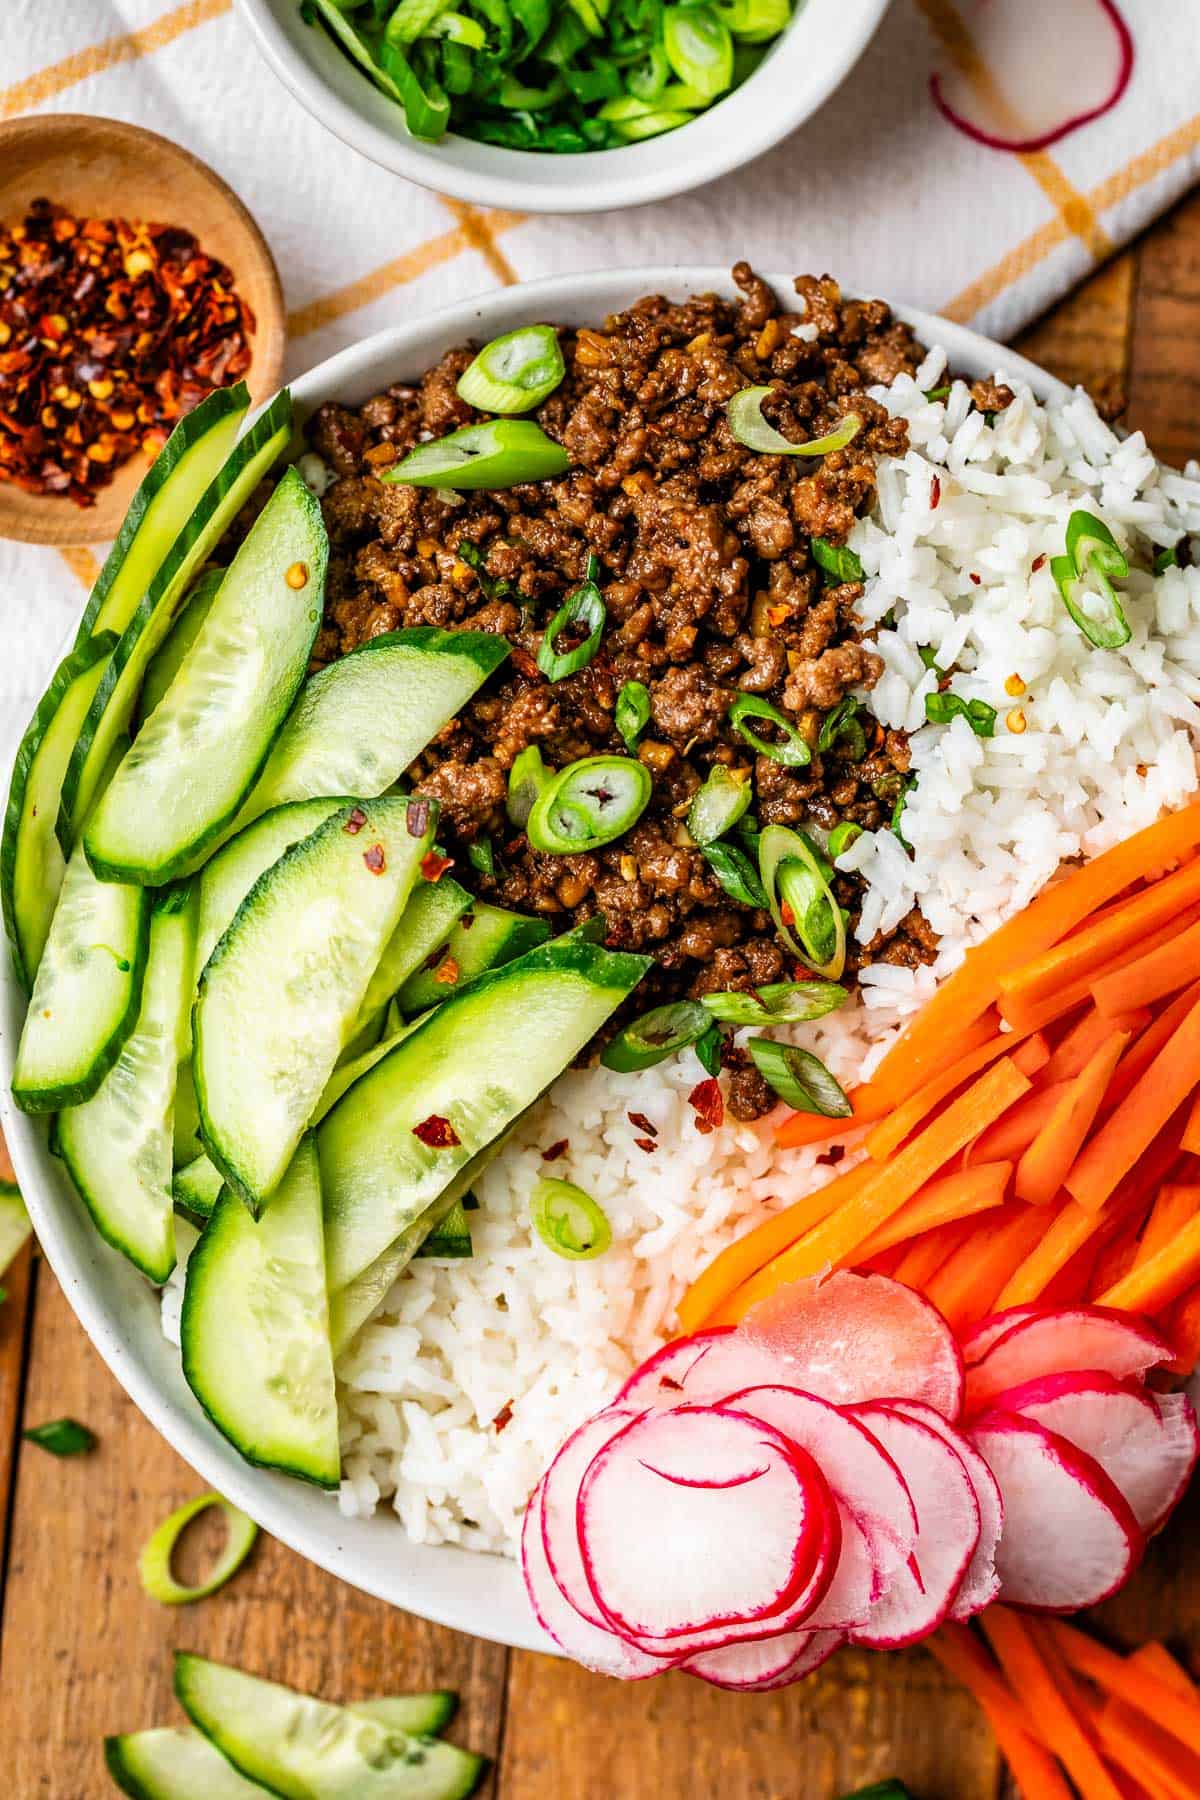 Korean beef bowl with rice and veggies on a wooden table with bowl of red pepper flakes.